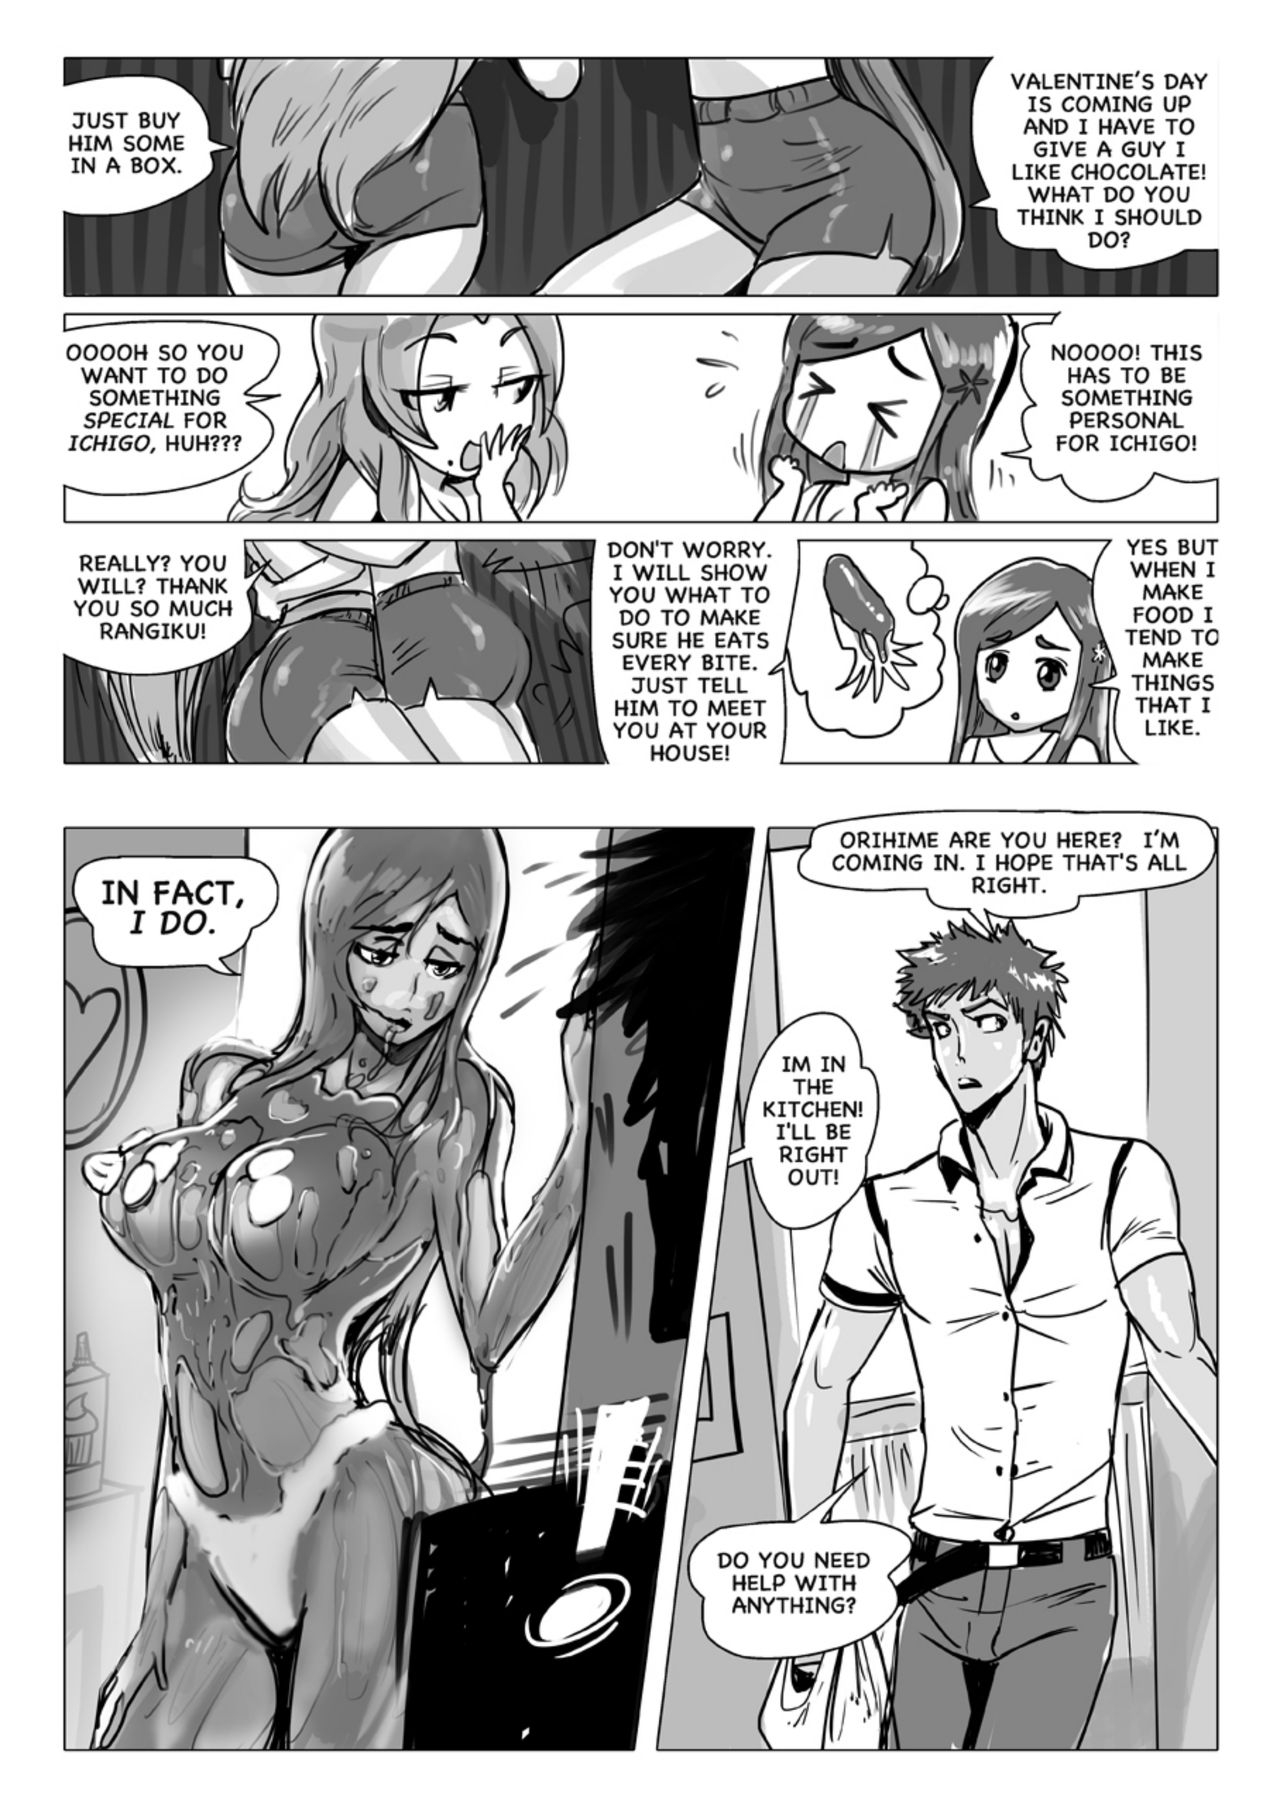 [Gairon] Happy to Serve You - Chapter 2 (Bleach) 22